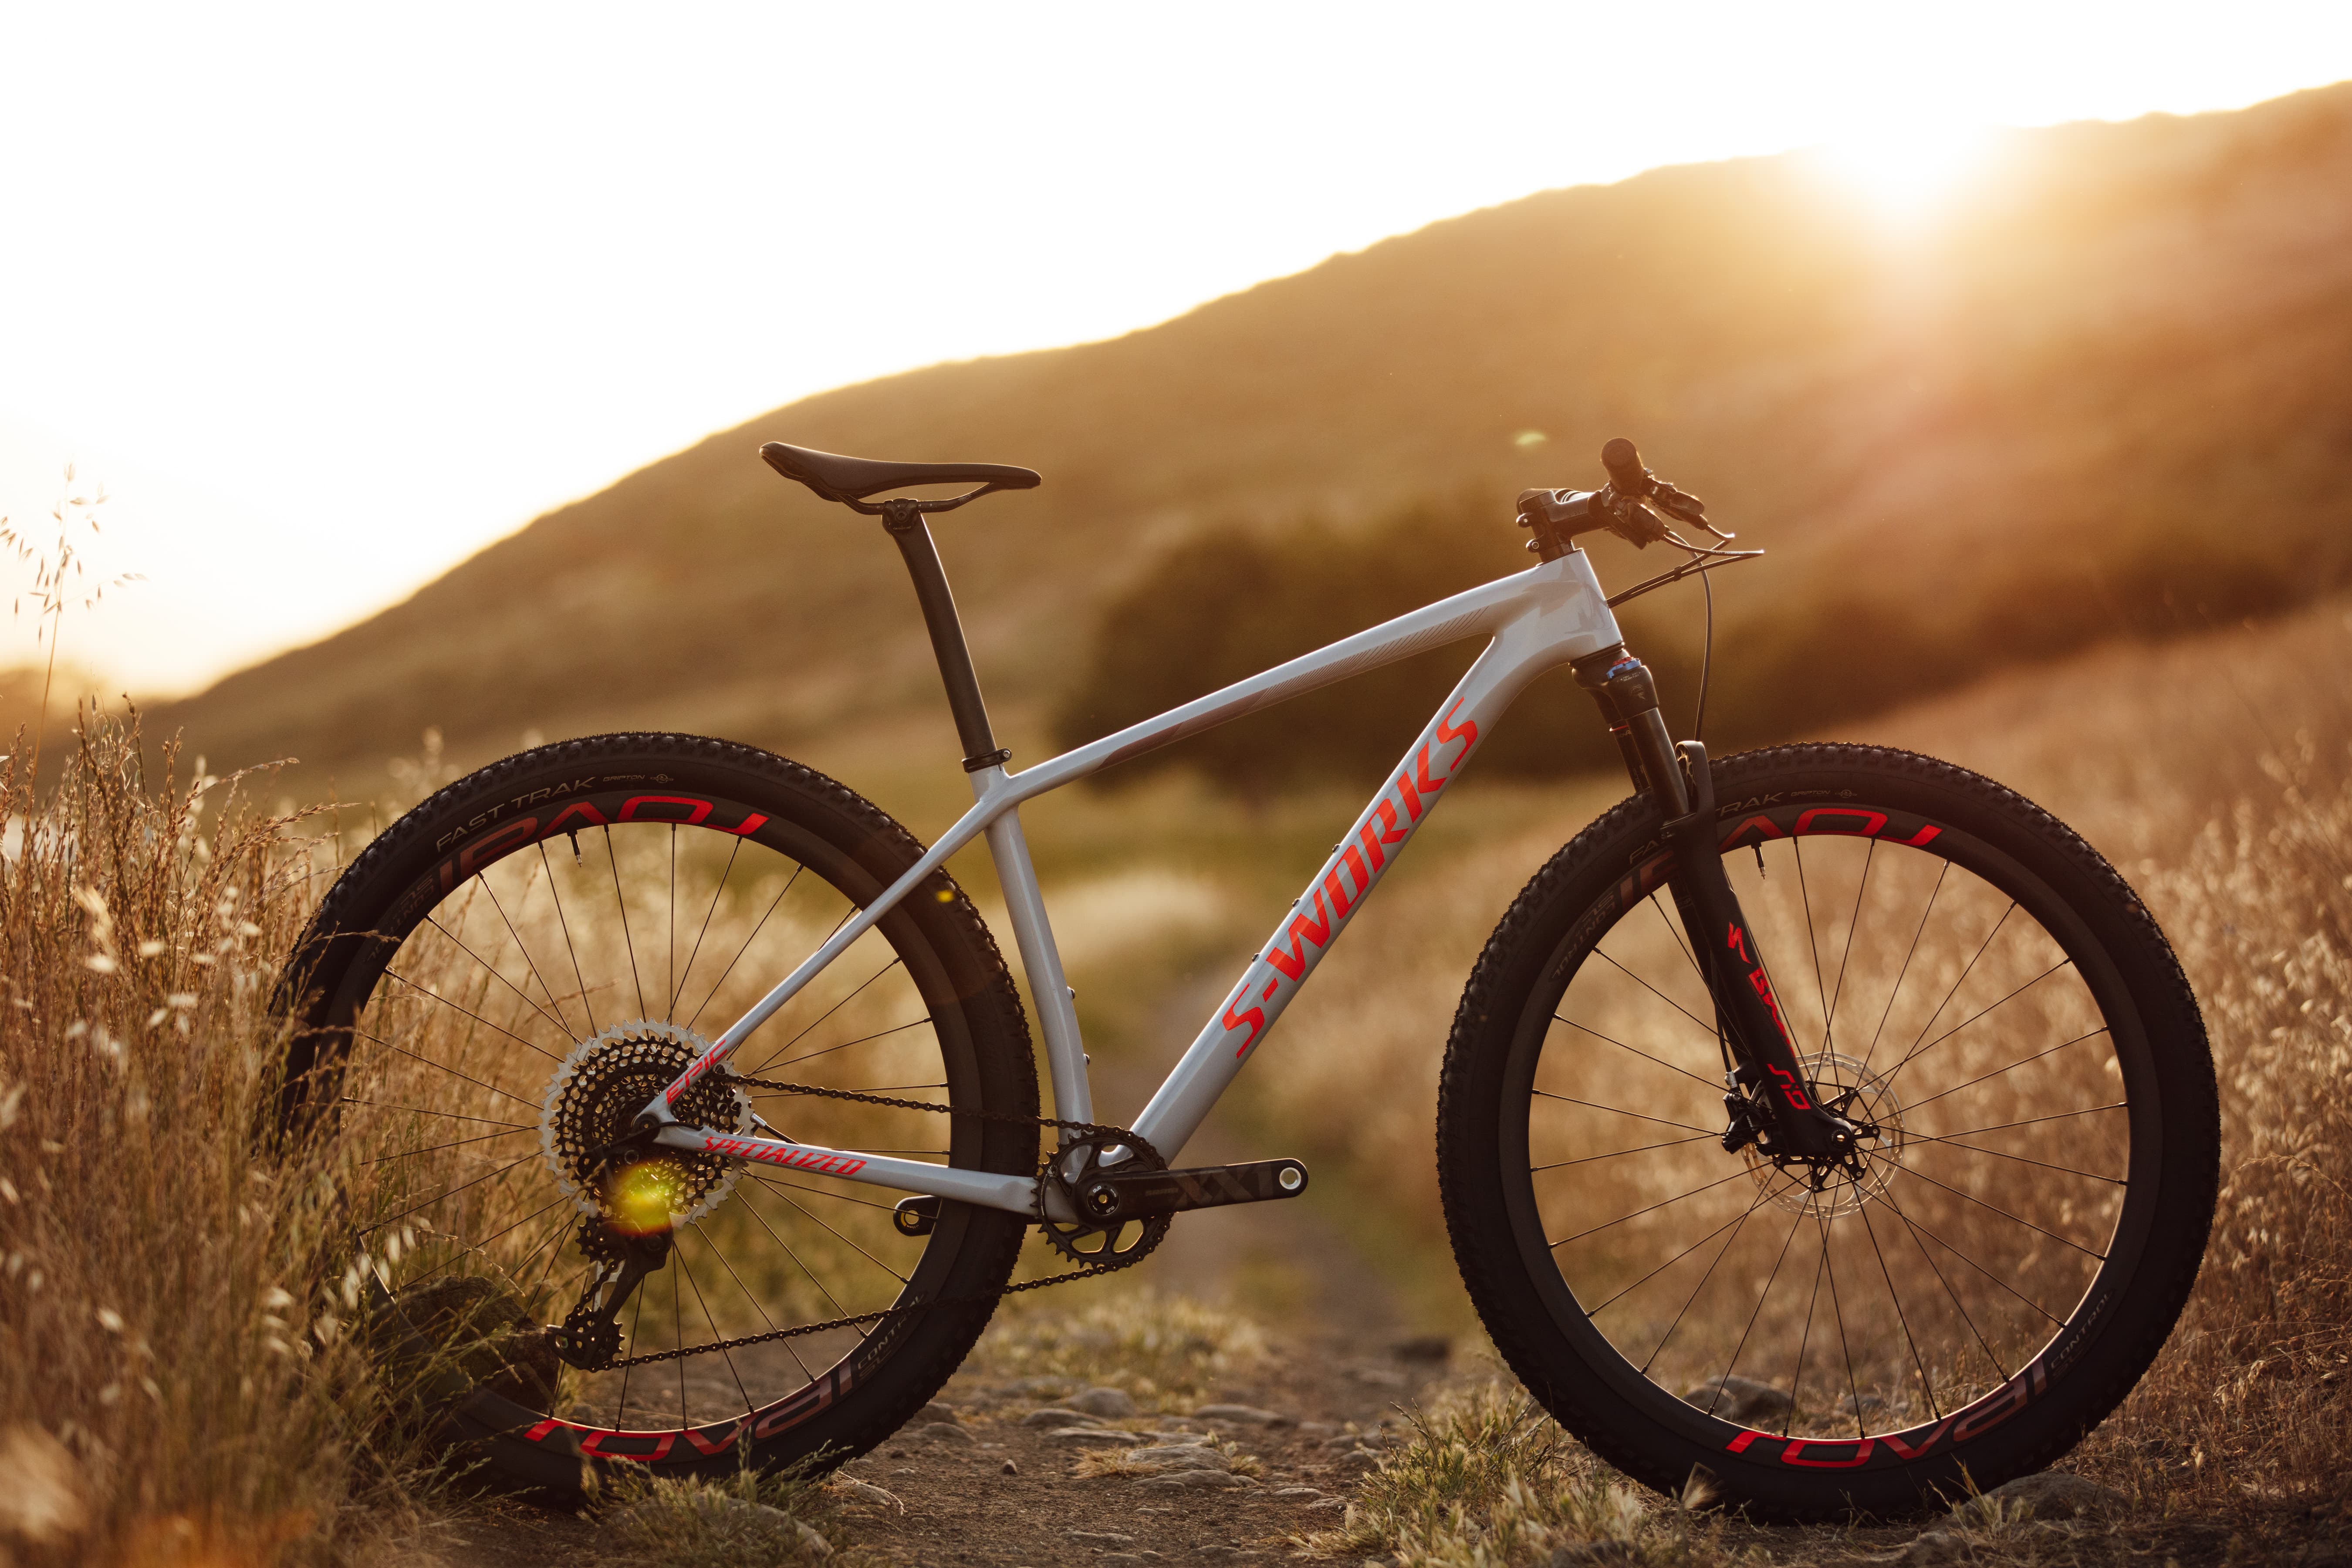 Here's the lightest hardtail ever The new Specialized Epic Hardtail